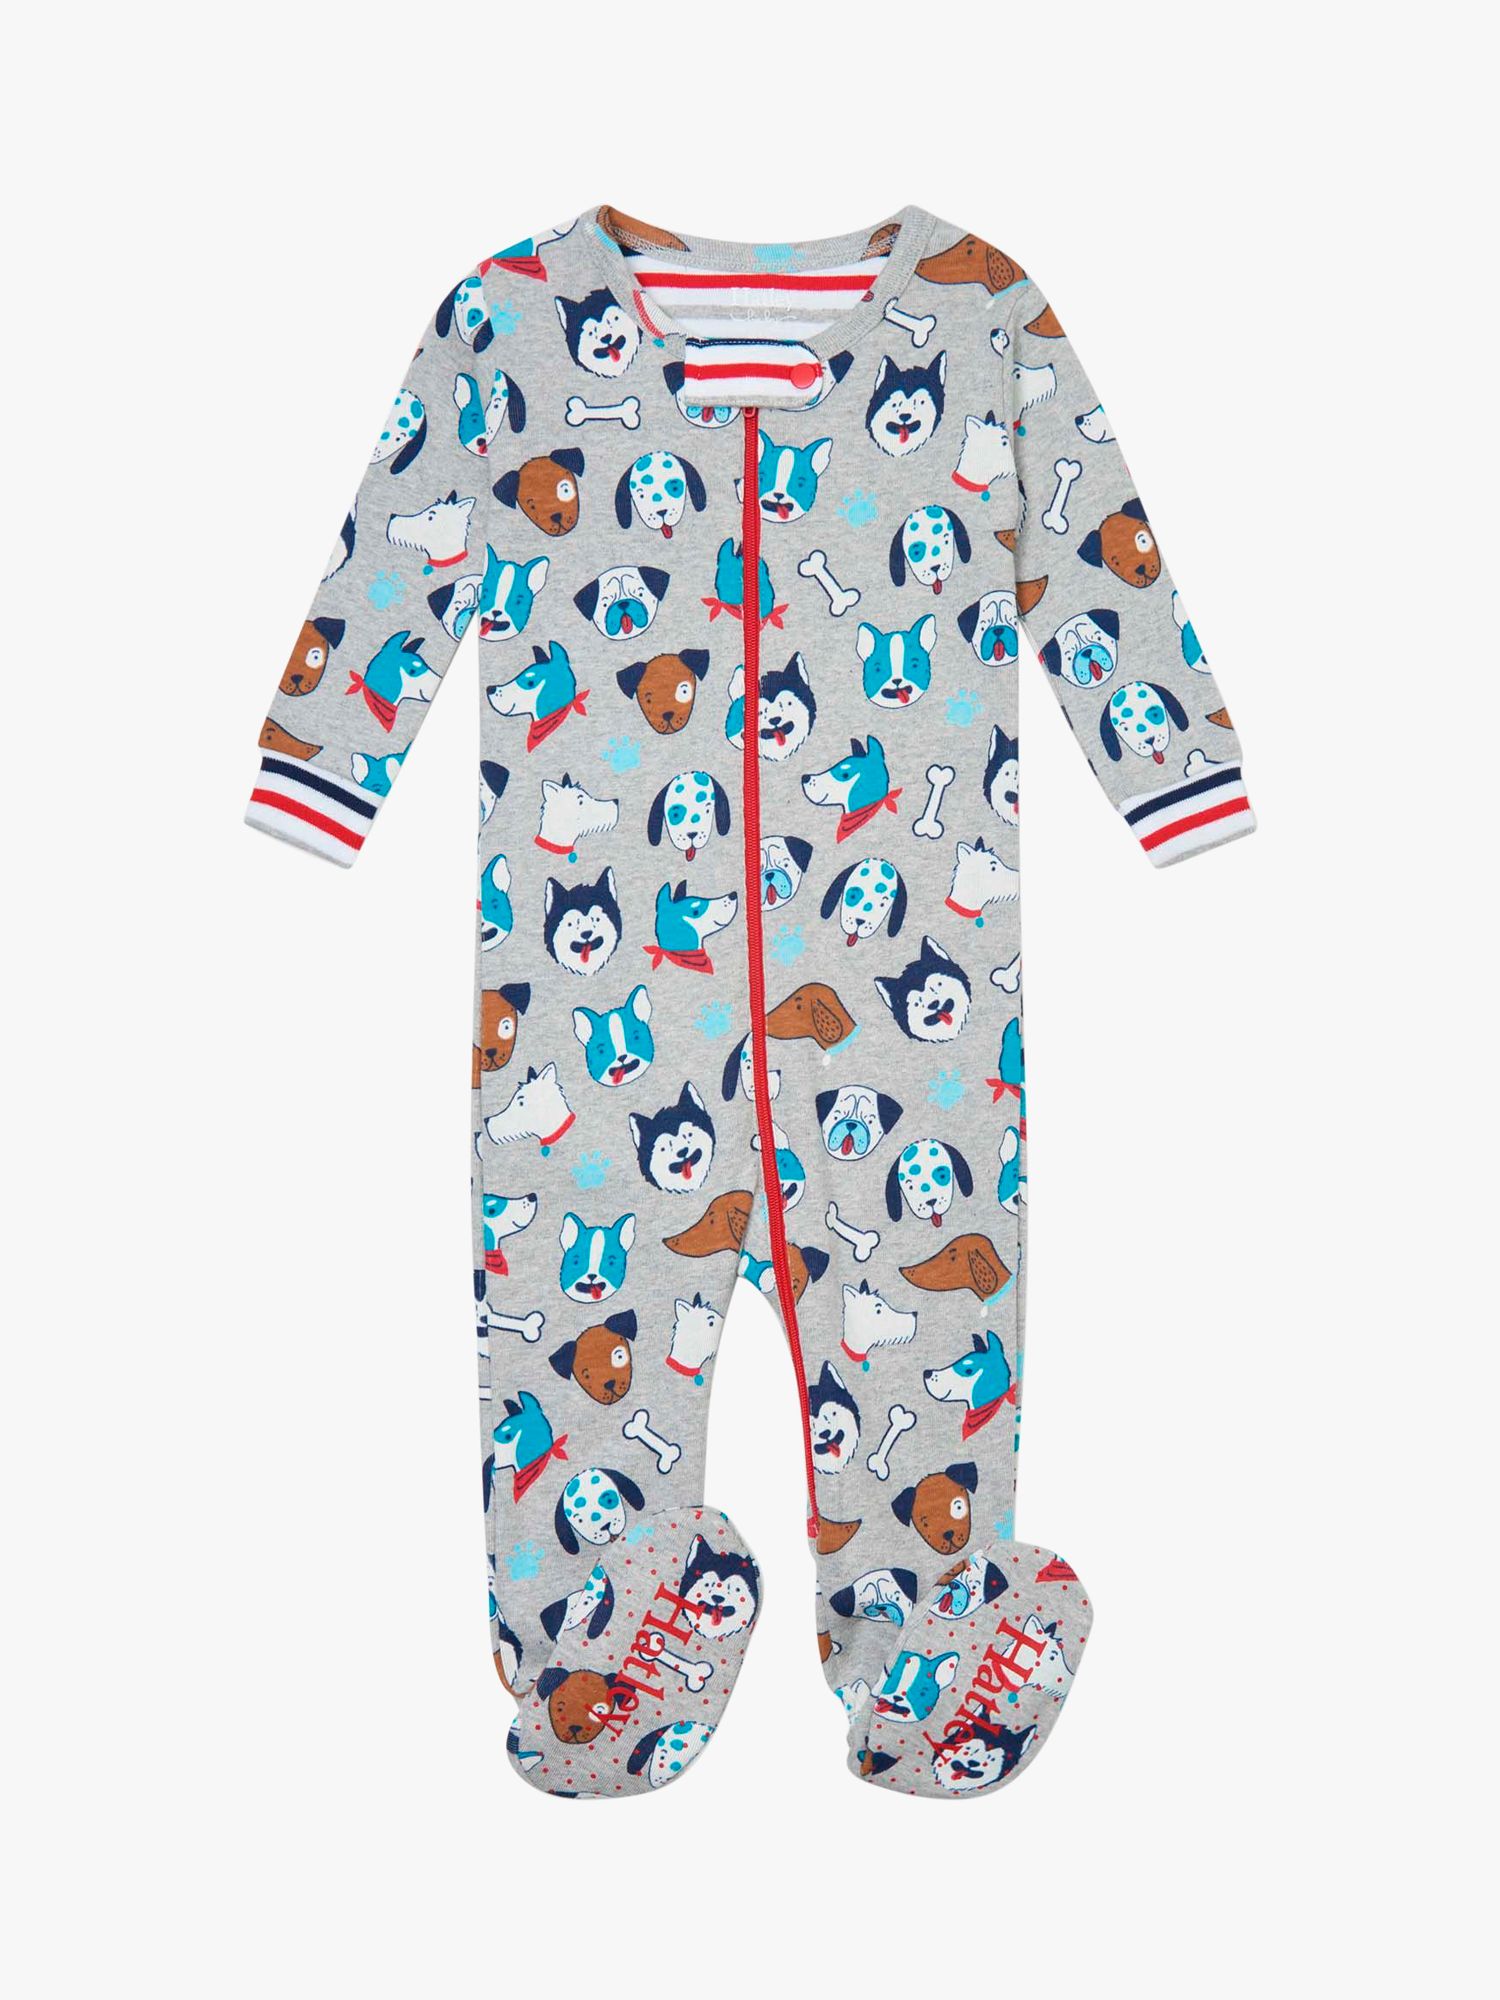 Hatley Baby Organic Cotton Pup Print Coverall Sleepsuit, Grey/Red